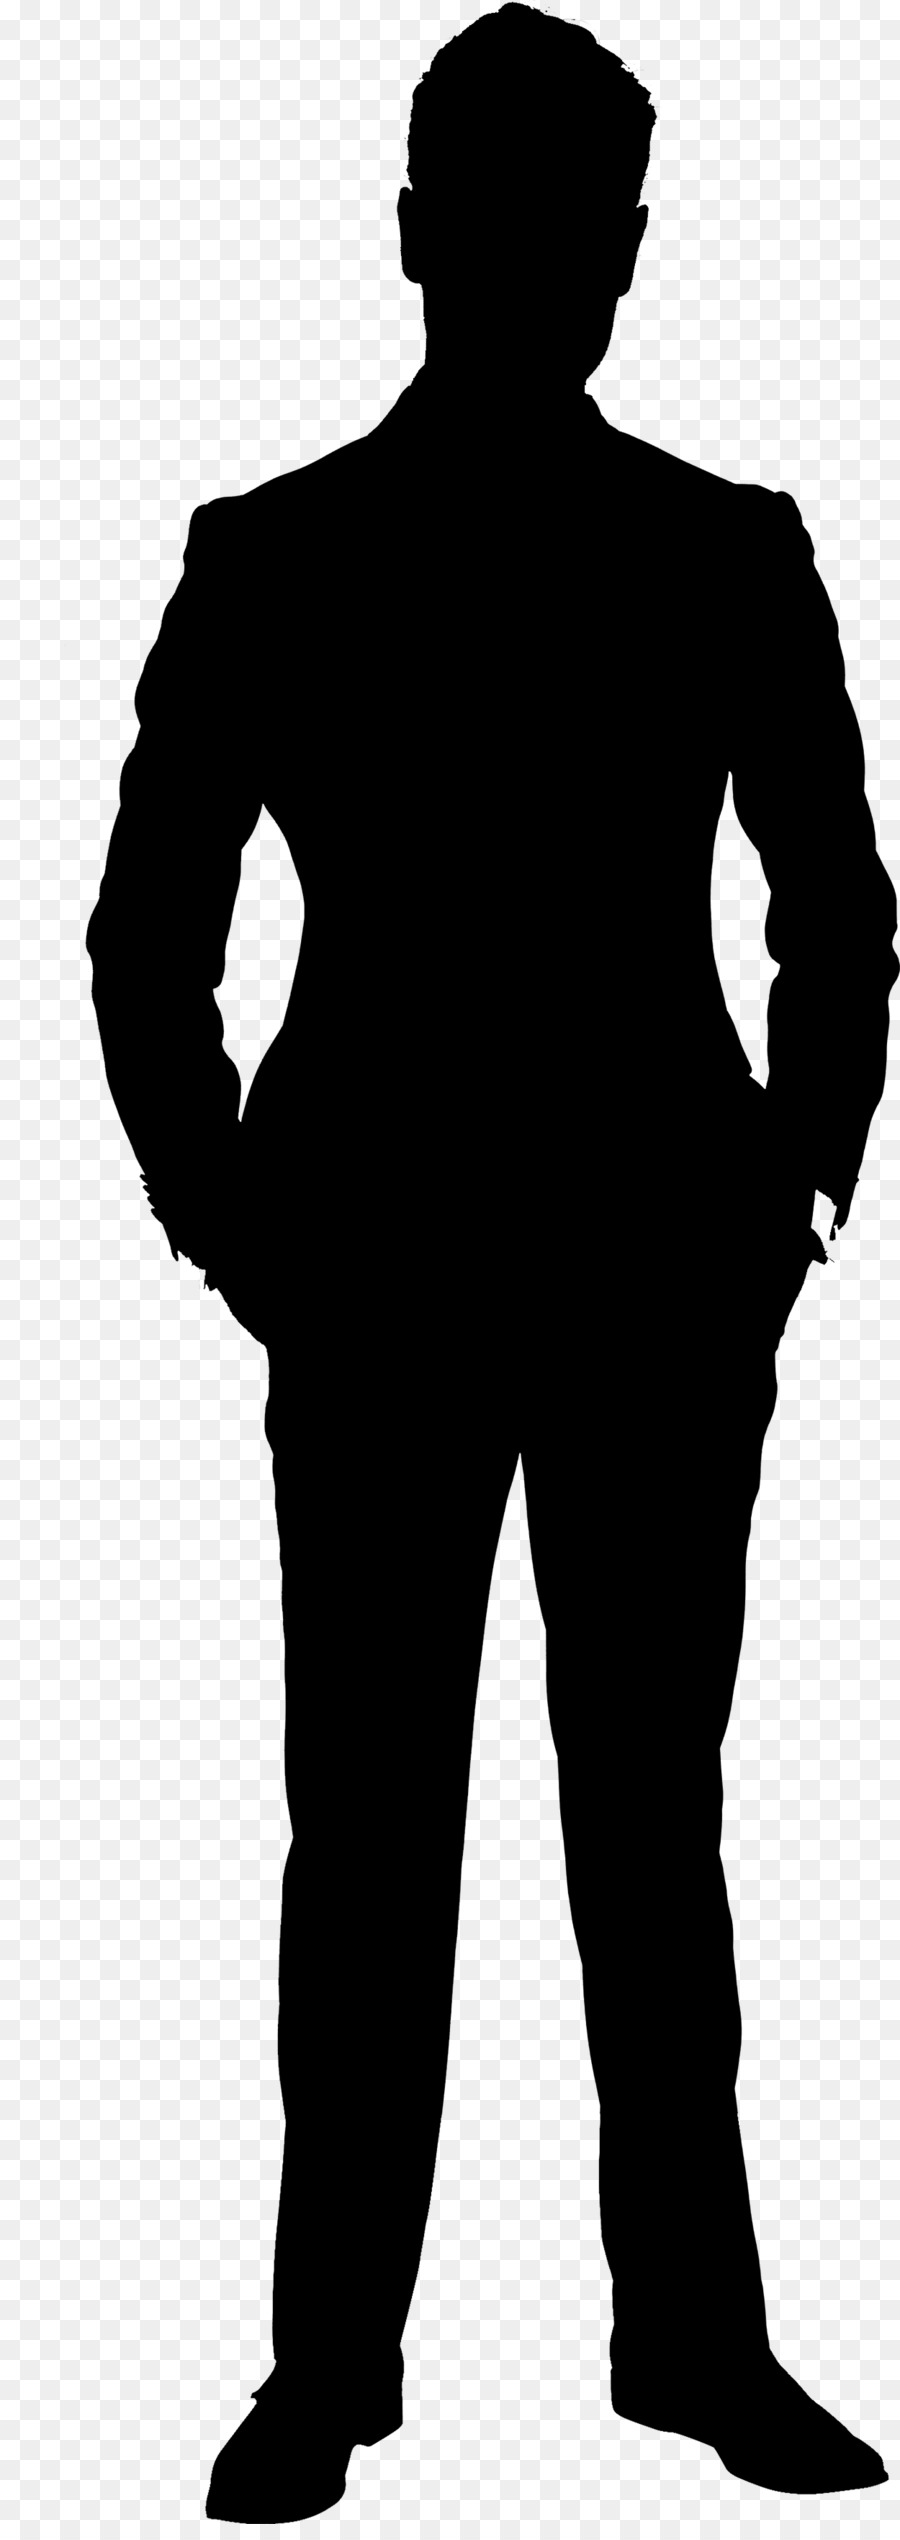 Free Man In Suit Silhouette Png, Download Free Man In Suit Silhouette ...